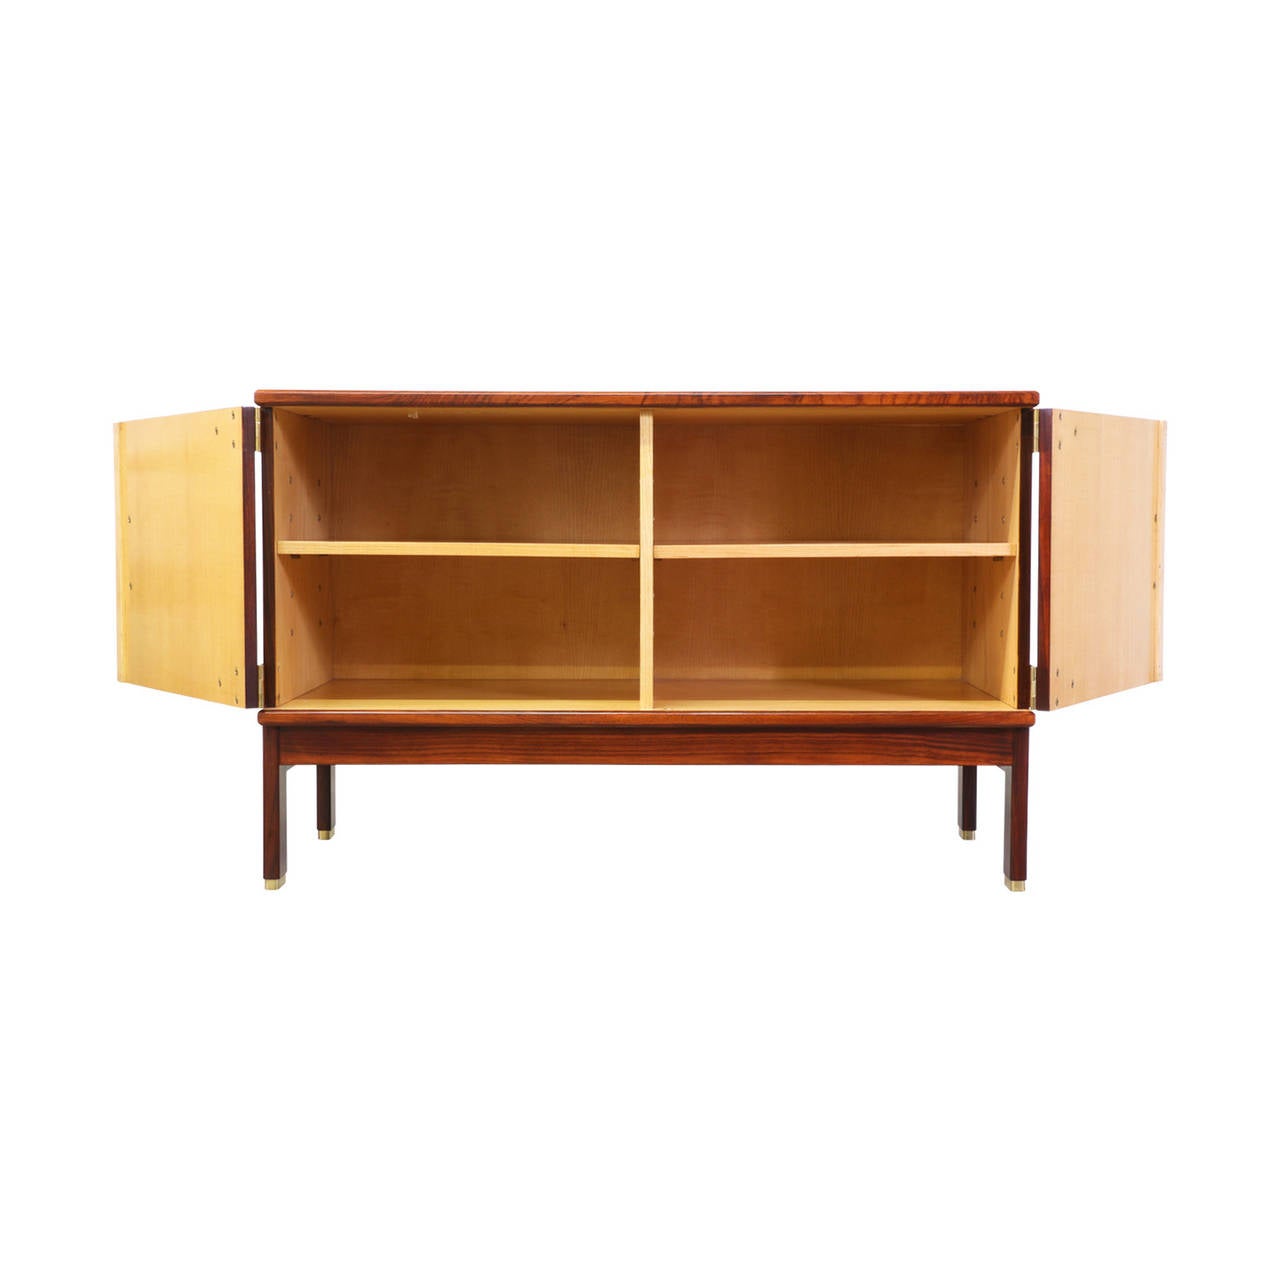 Designer: Unknown
Manufacturer: Unknown
Period/Style: Danish Modern
Country: Denmark
Date: 1960s

Dimensions: 29.75″H x 49.5″W x 21.75″D
Materials: Rosewood, Brass, Birch
Condition: Excellent – Newly Refinished
Number of Items: 1
ID Number: